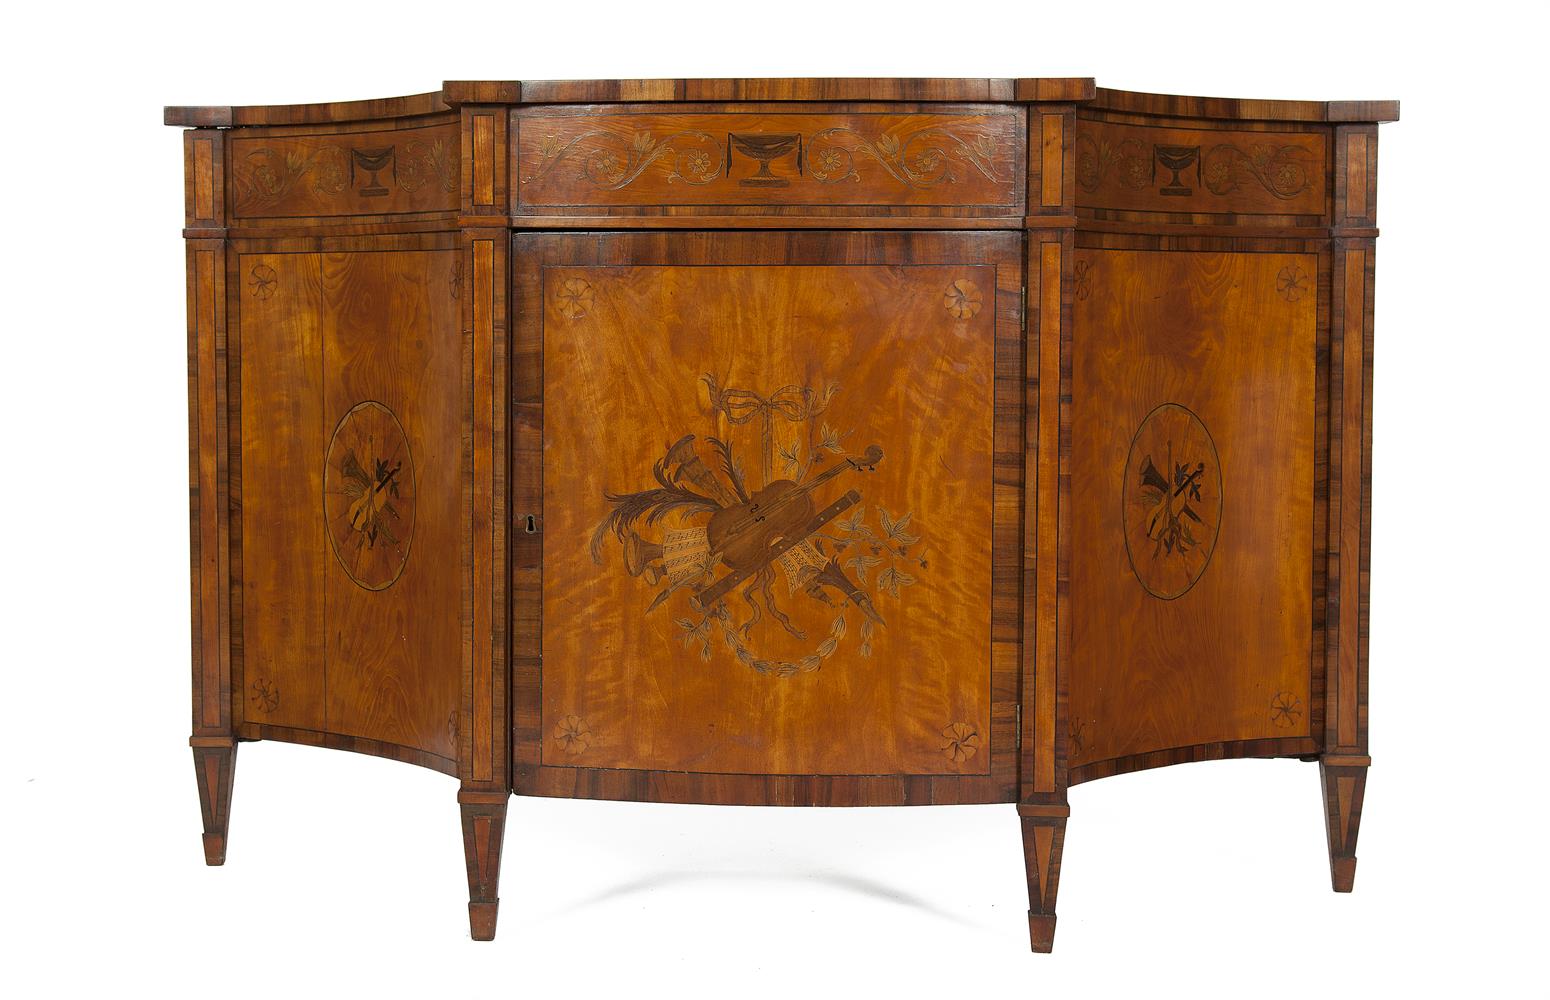 A GEORGE III INLAID SATINWOOD BREAKFRONT SIDE CABINET, the top inlaid with an oval medallion of